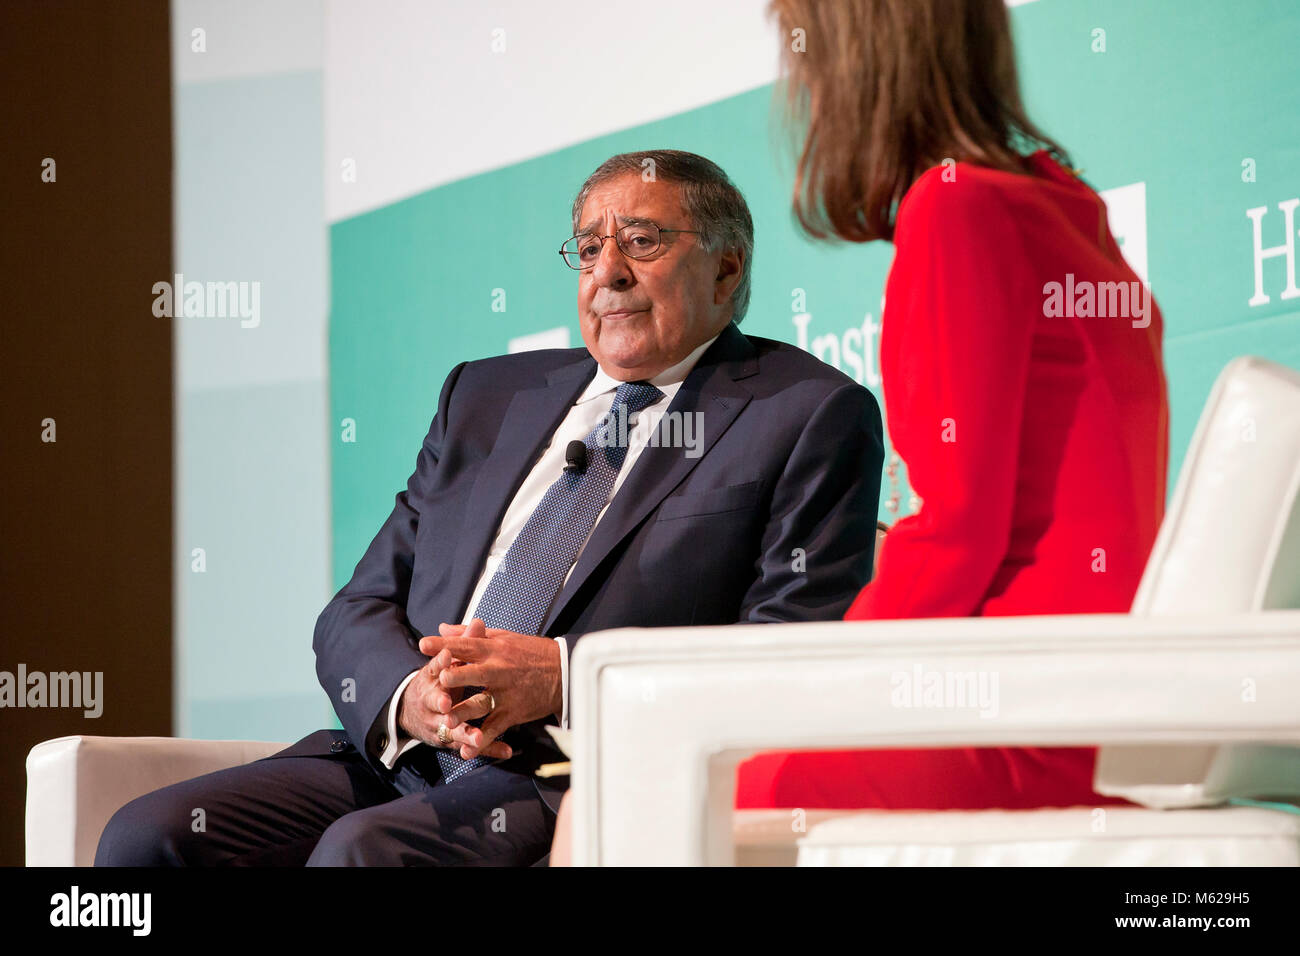 October 23, 2017, Washington, DC USA - Leon Panetta, former Secretary of Defense and CIA, in an interview with Washington Post editor, Lally Weymouth Stock Photo